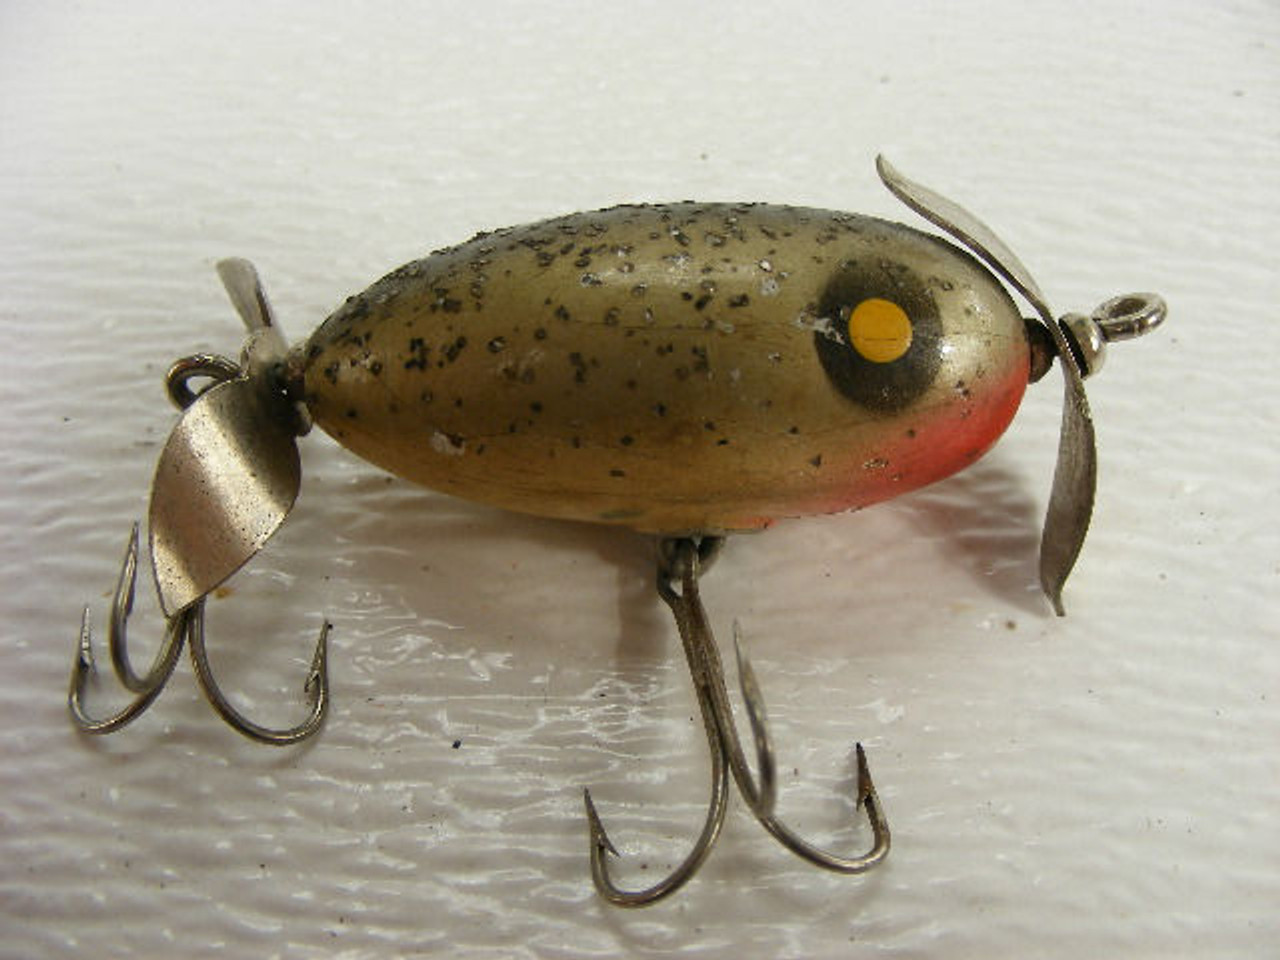 This 2 3/4 old wooden fishing lure has front and back propellors.